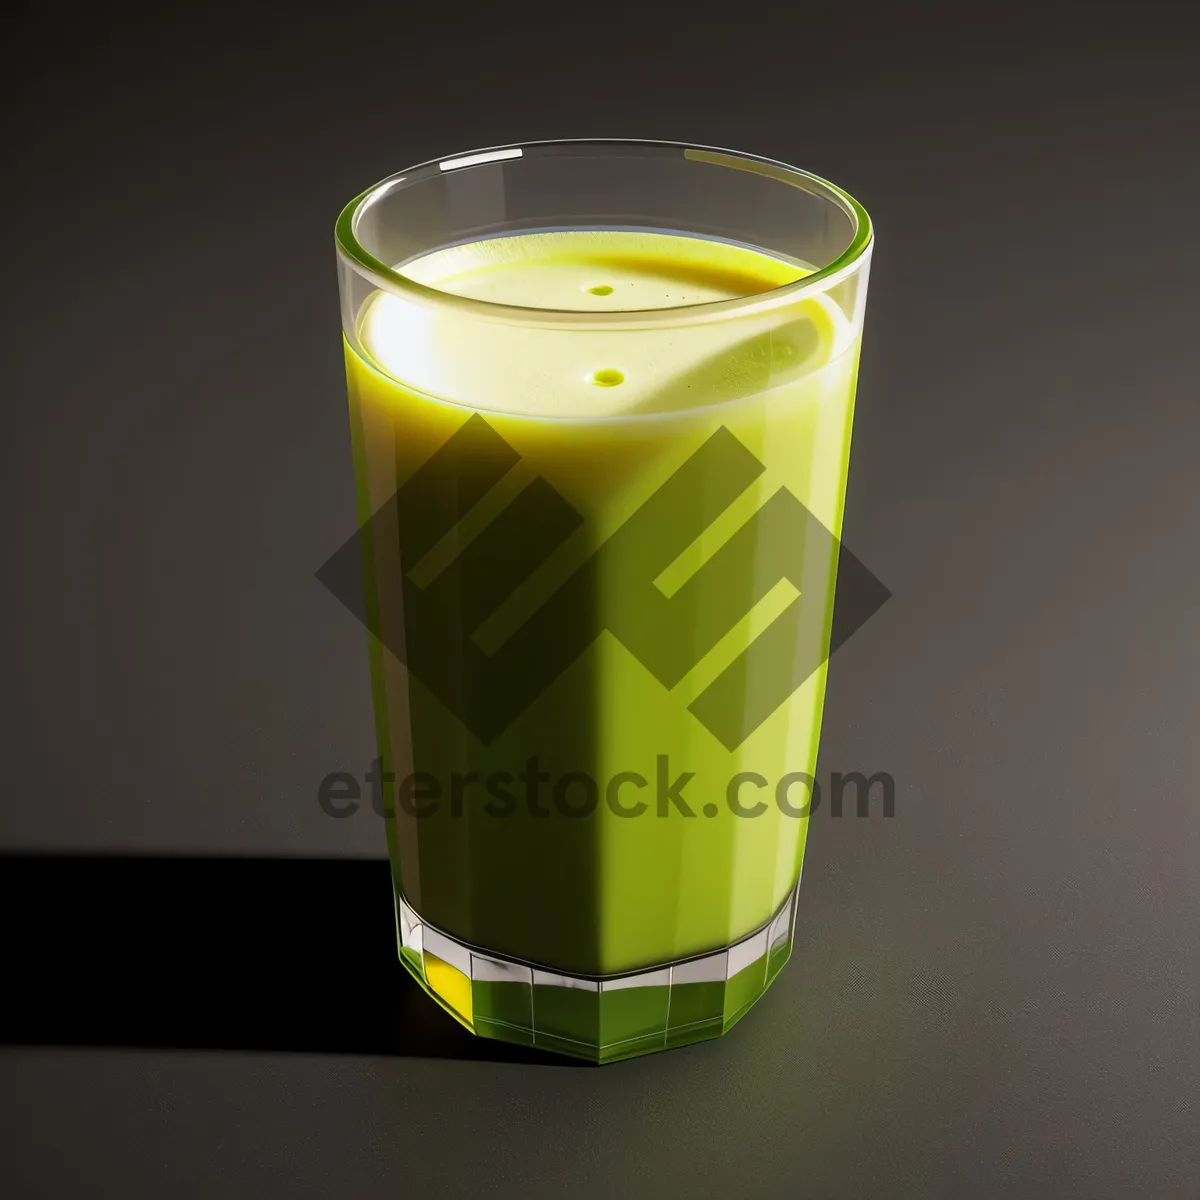 Picture of Refreshing Yellow Beverage in Transparent Glass